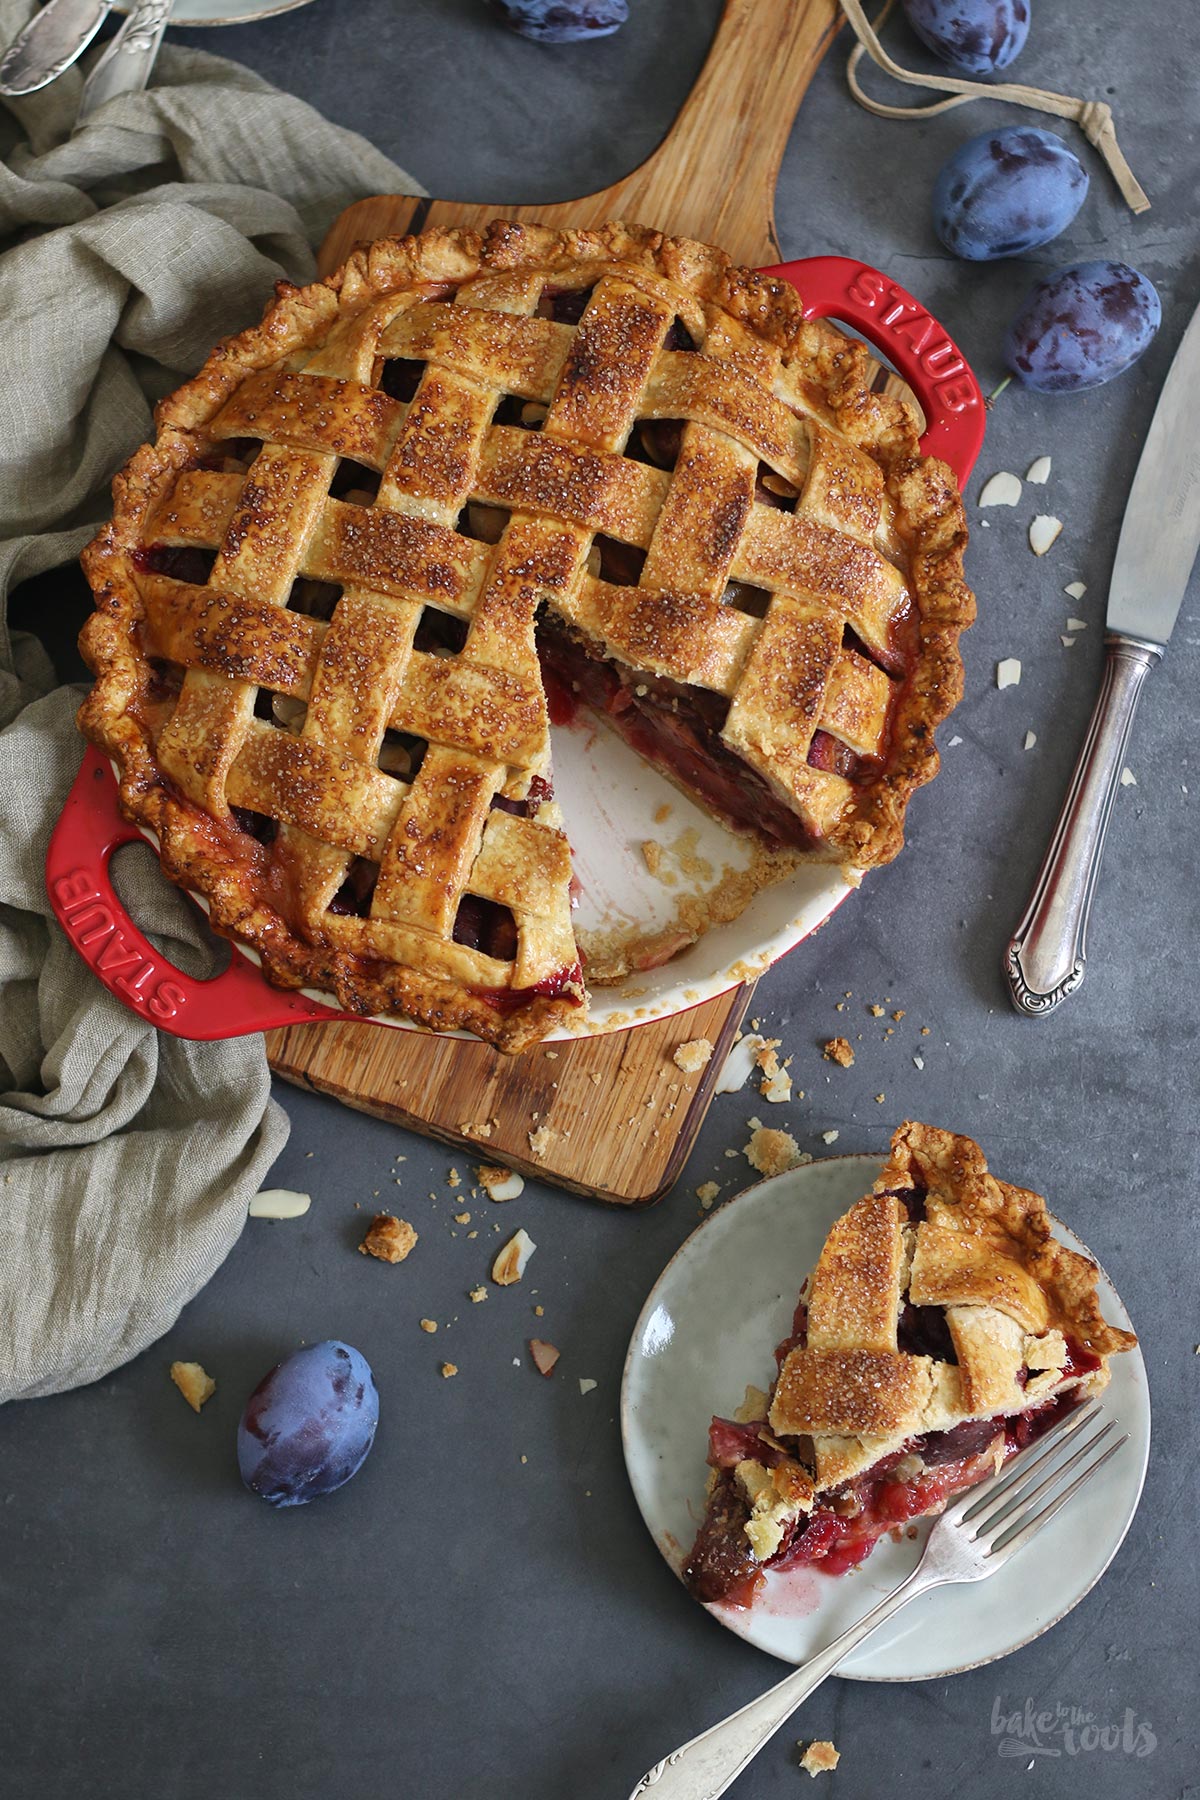 Damson Plum Pie | Bake to the roots